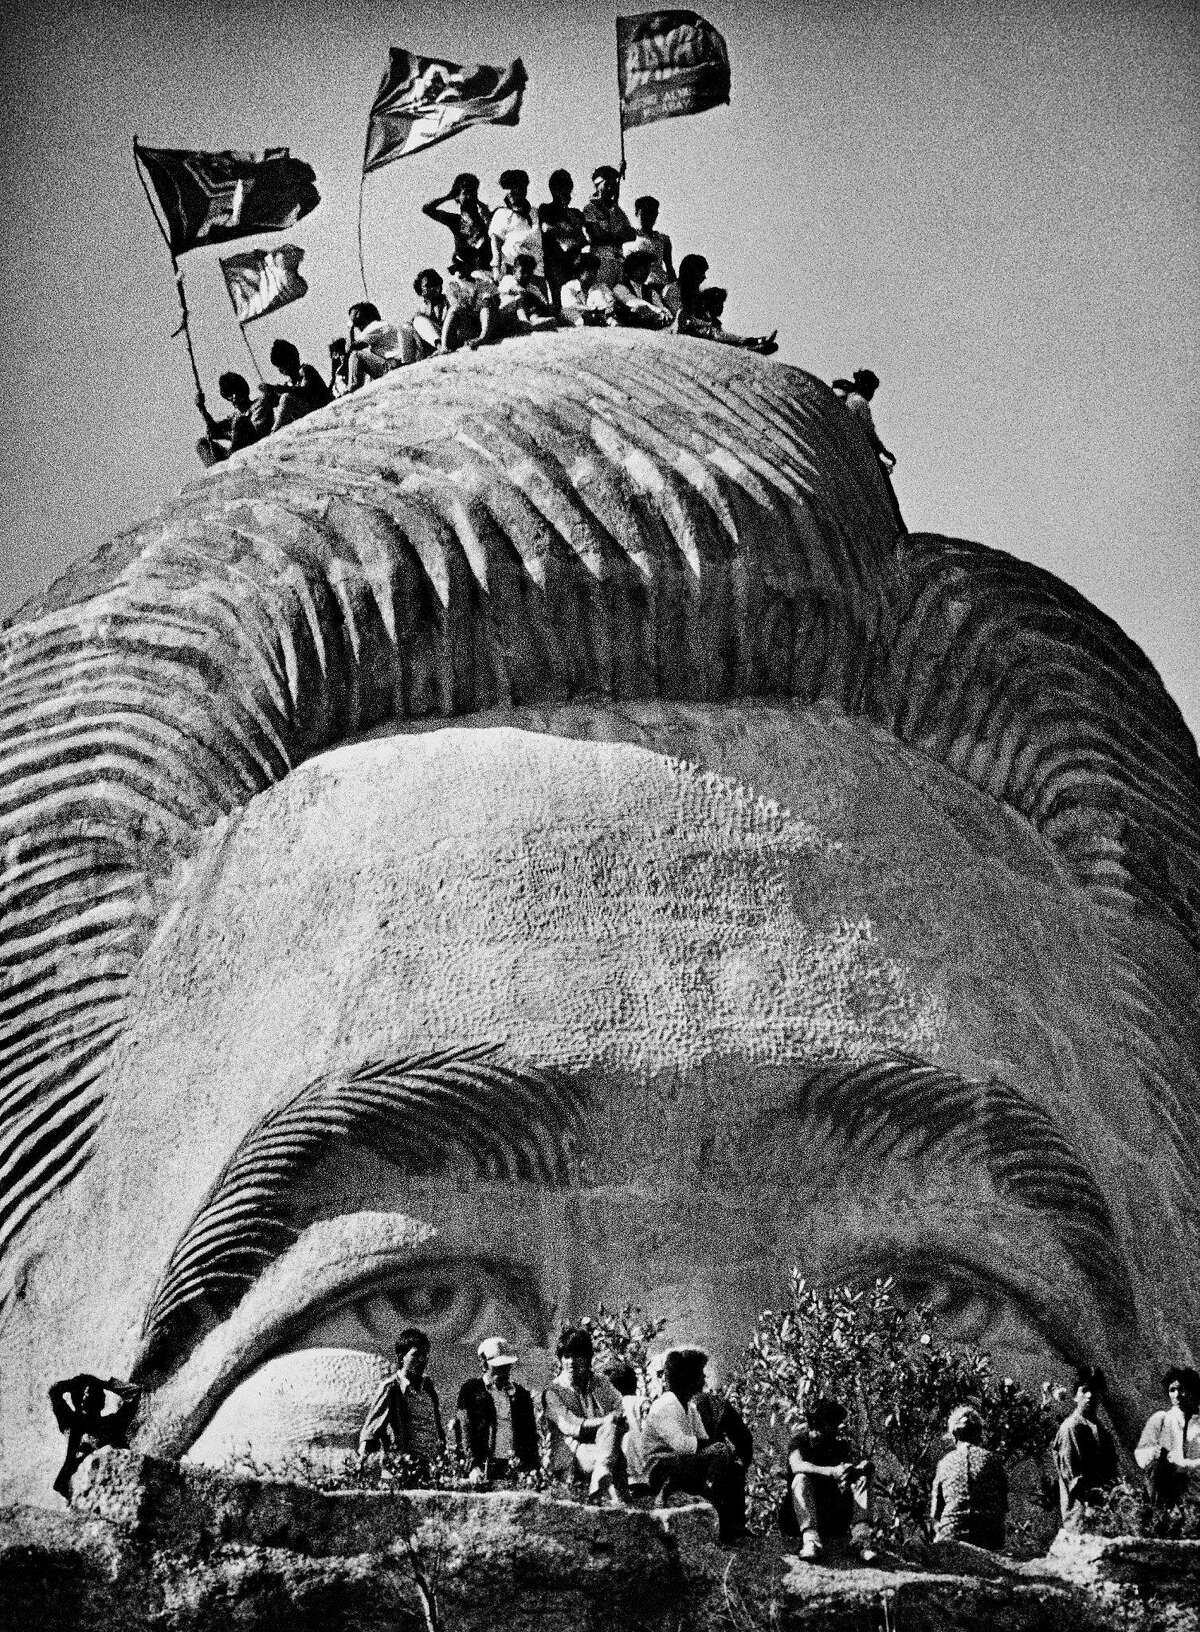 Representatives of tribal groups scale of four-story tall statue of Ferdinand Marcos in La Union Province in a rite to exorcise the former president's spirit from the statue. (Mar. 10, 1986.) Photo by Kim Komenich for the San Francisco Examiner. (Copyright, 2011, Bancroft Library/the University of California)